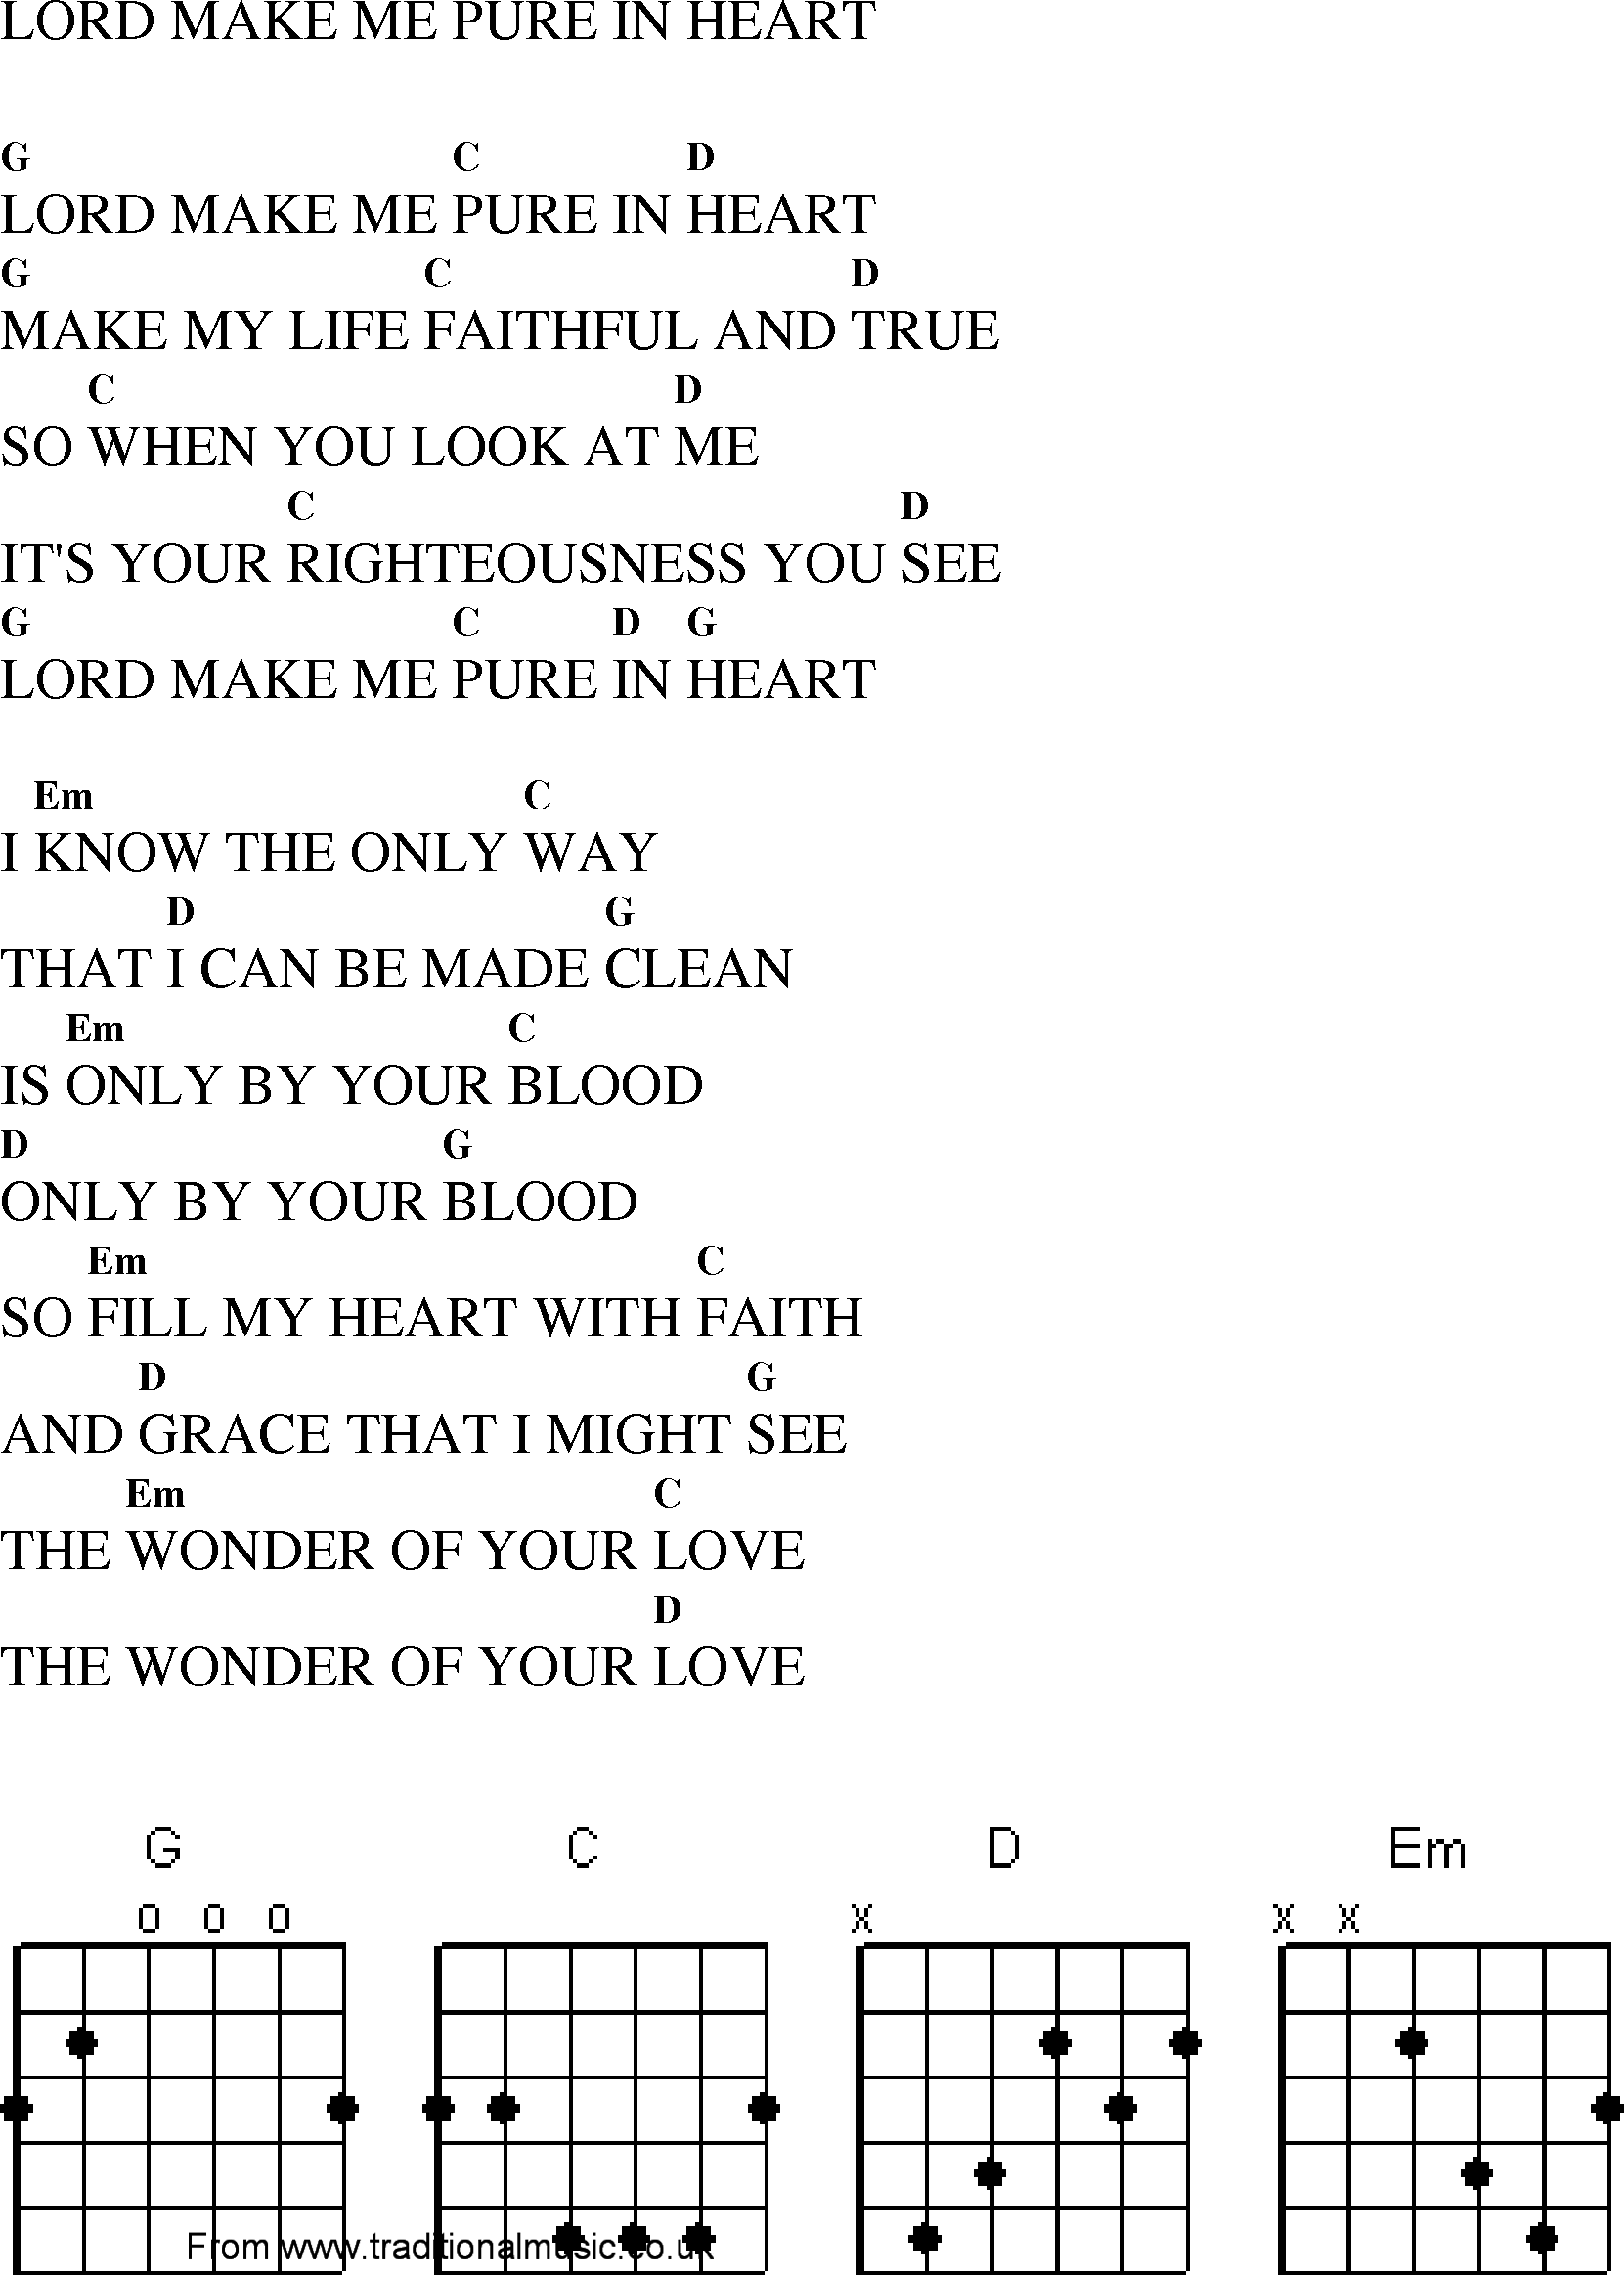 Gospel Song: lord_make_me_pure_in_heart, lyrics and chords.